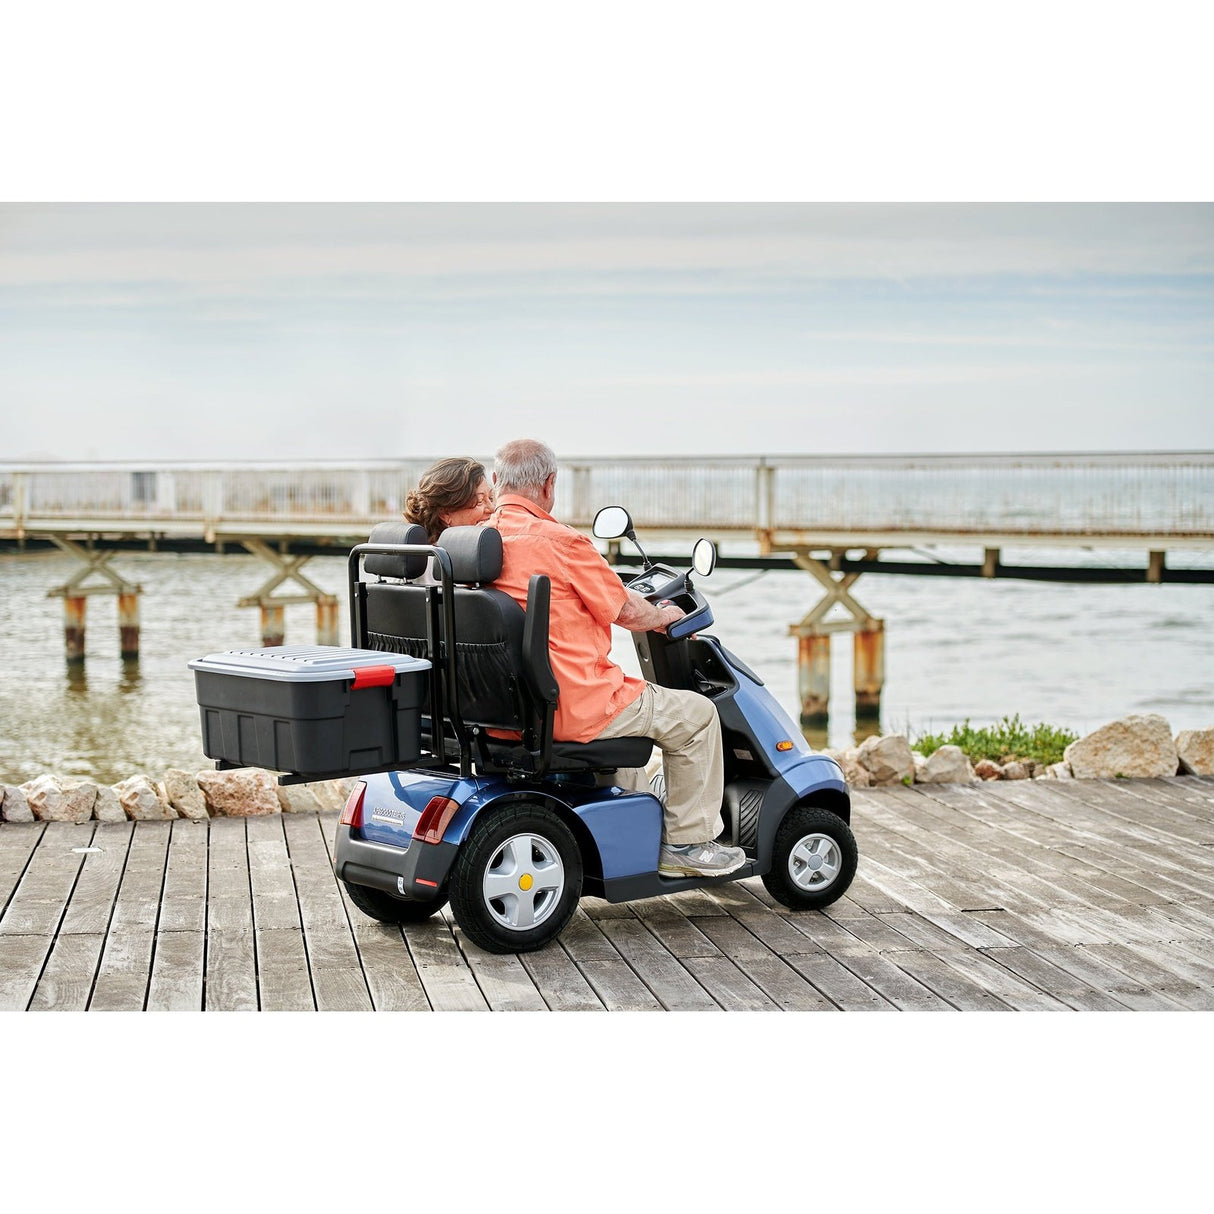 Afikim Afiscooter S4 Outdoor Heavy-Duty 4-Wheel Mobility Scooter